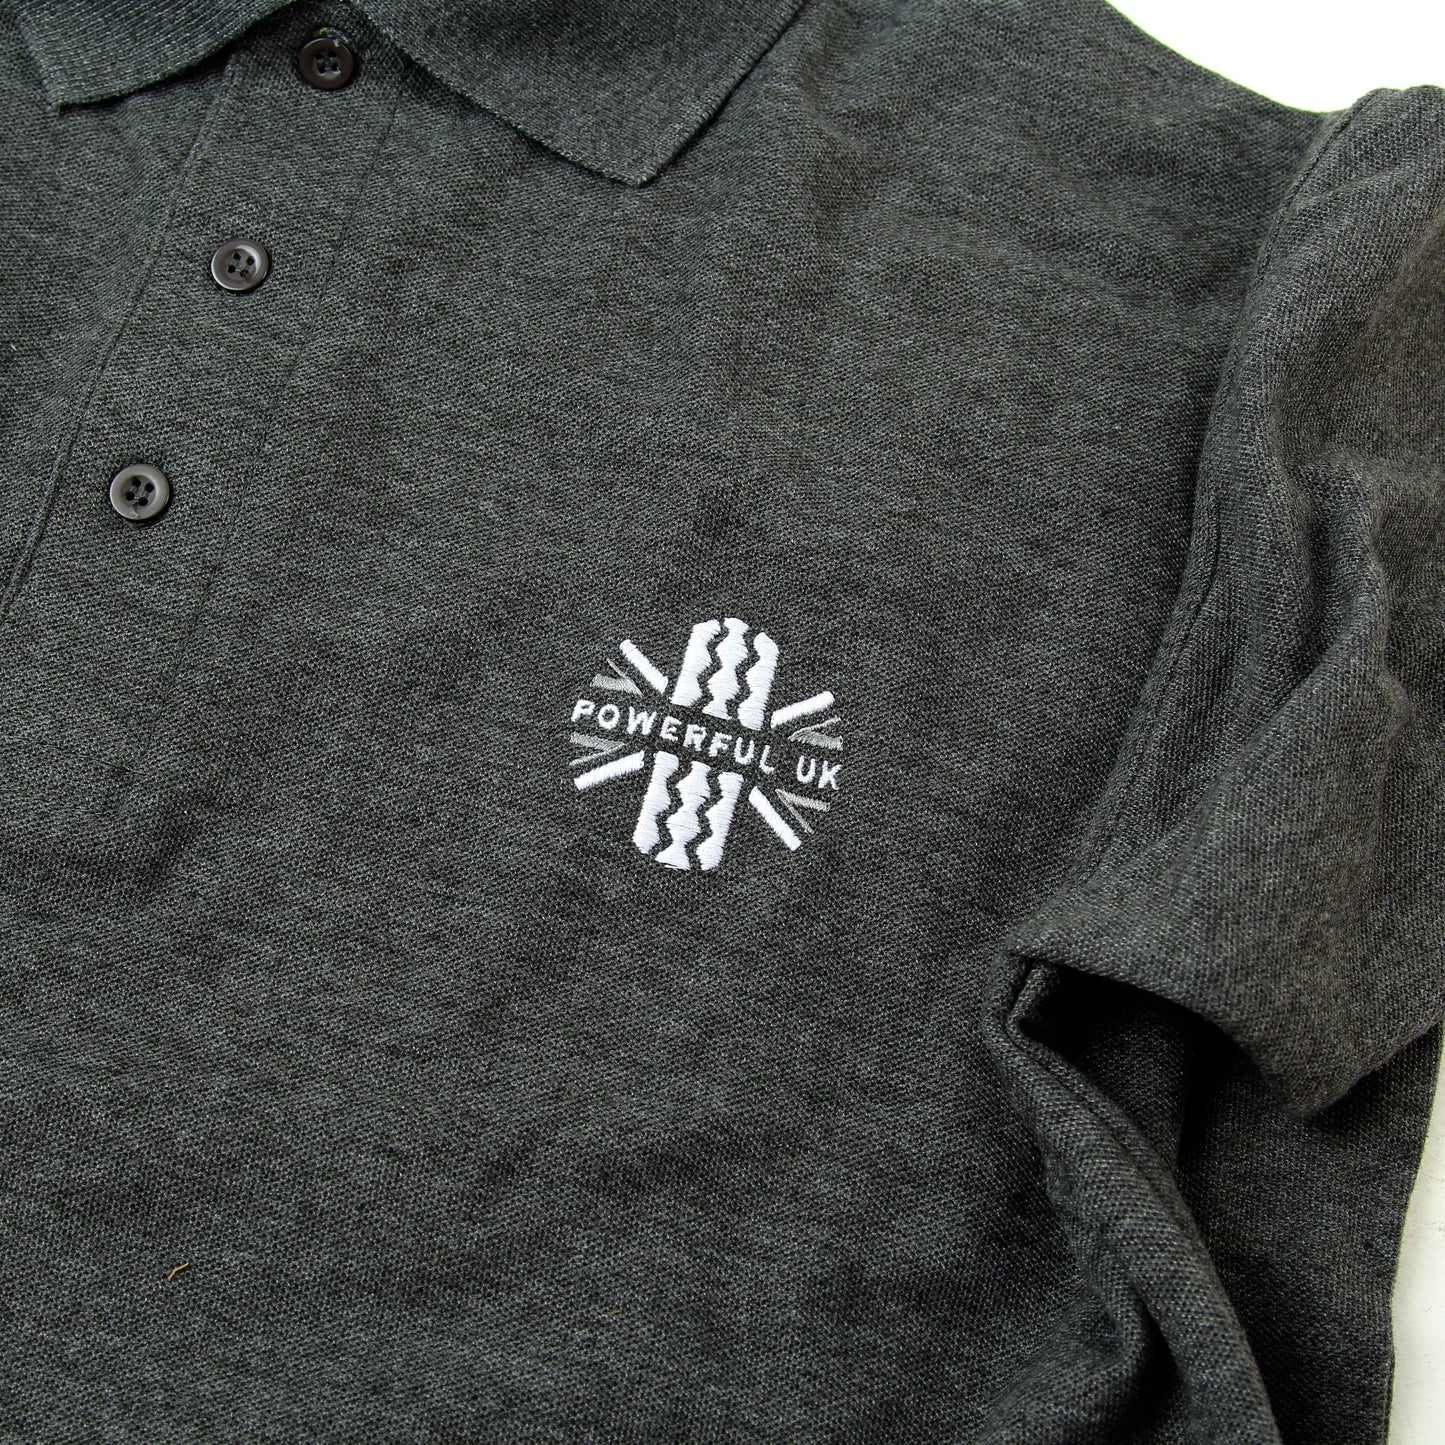 Embroidered Polo Shirt Powerful UK Ltd "Merch" - Charcoal Grey - SMALL